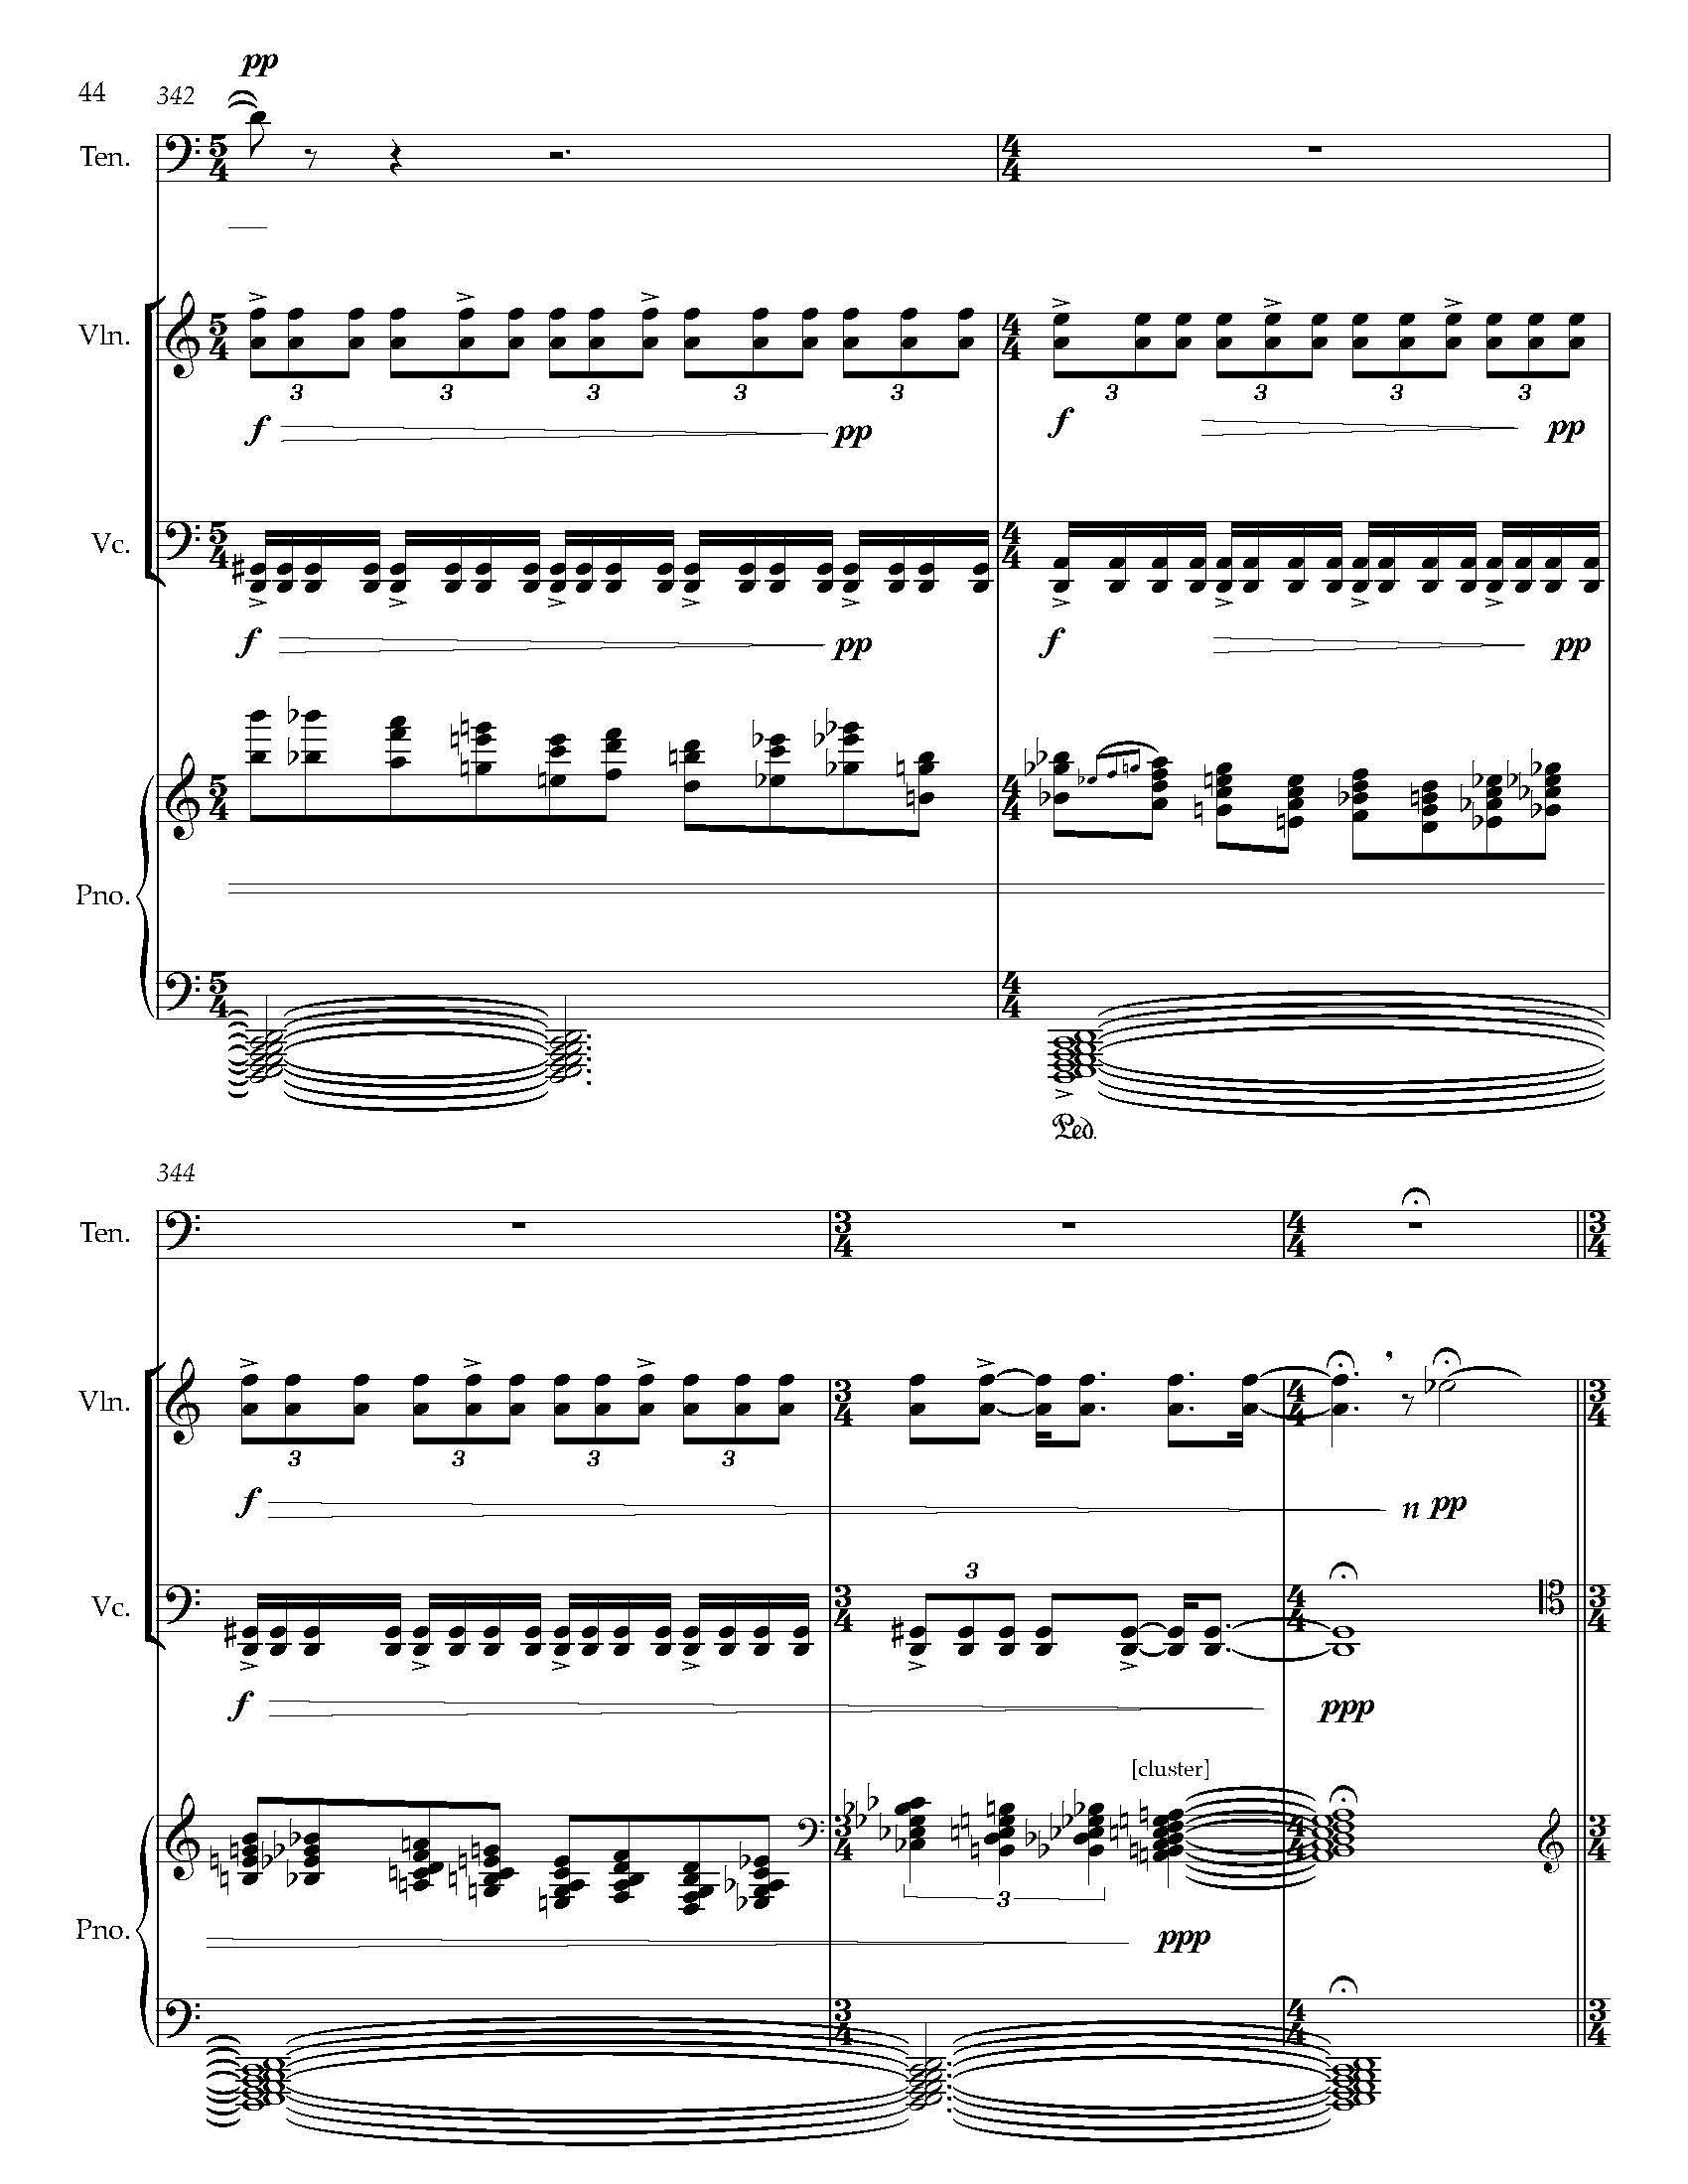 Gursky Songs - Complete Score_Page_52.jpg